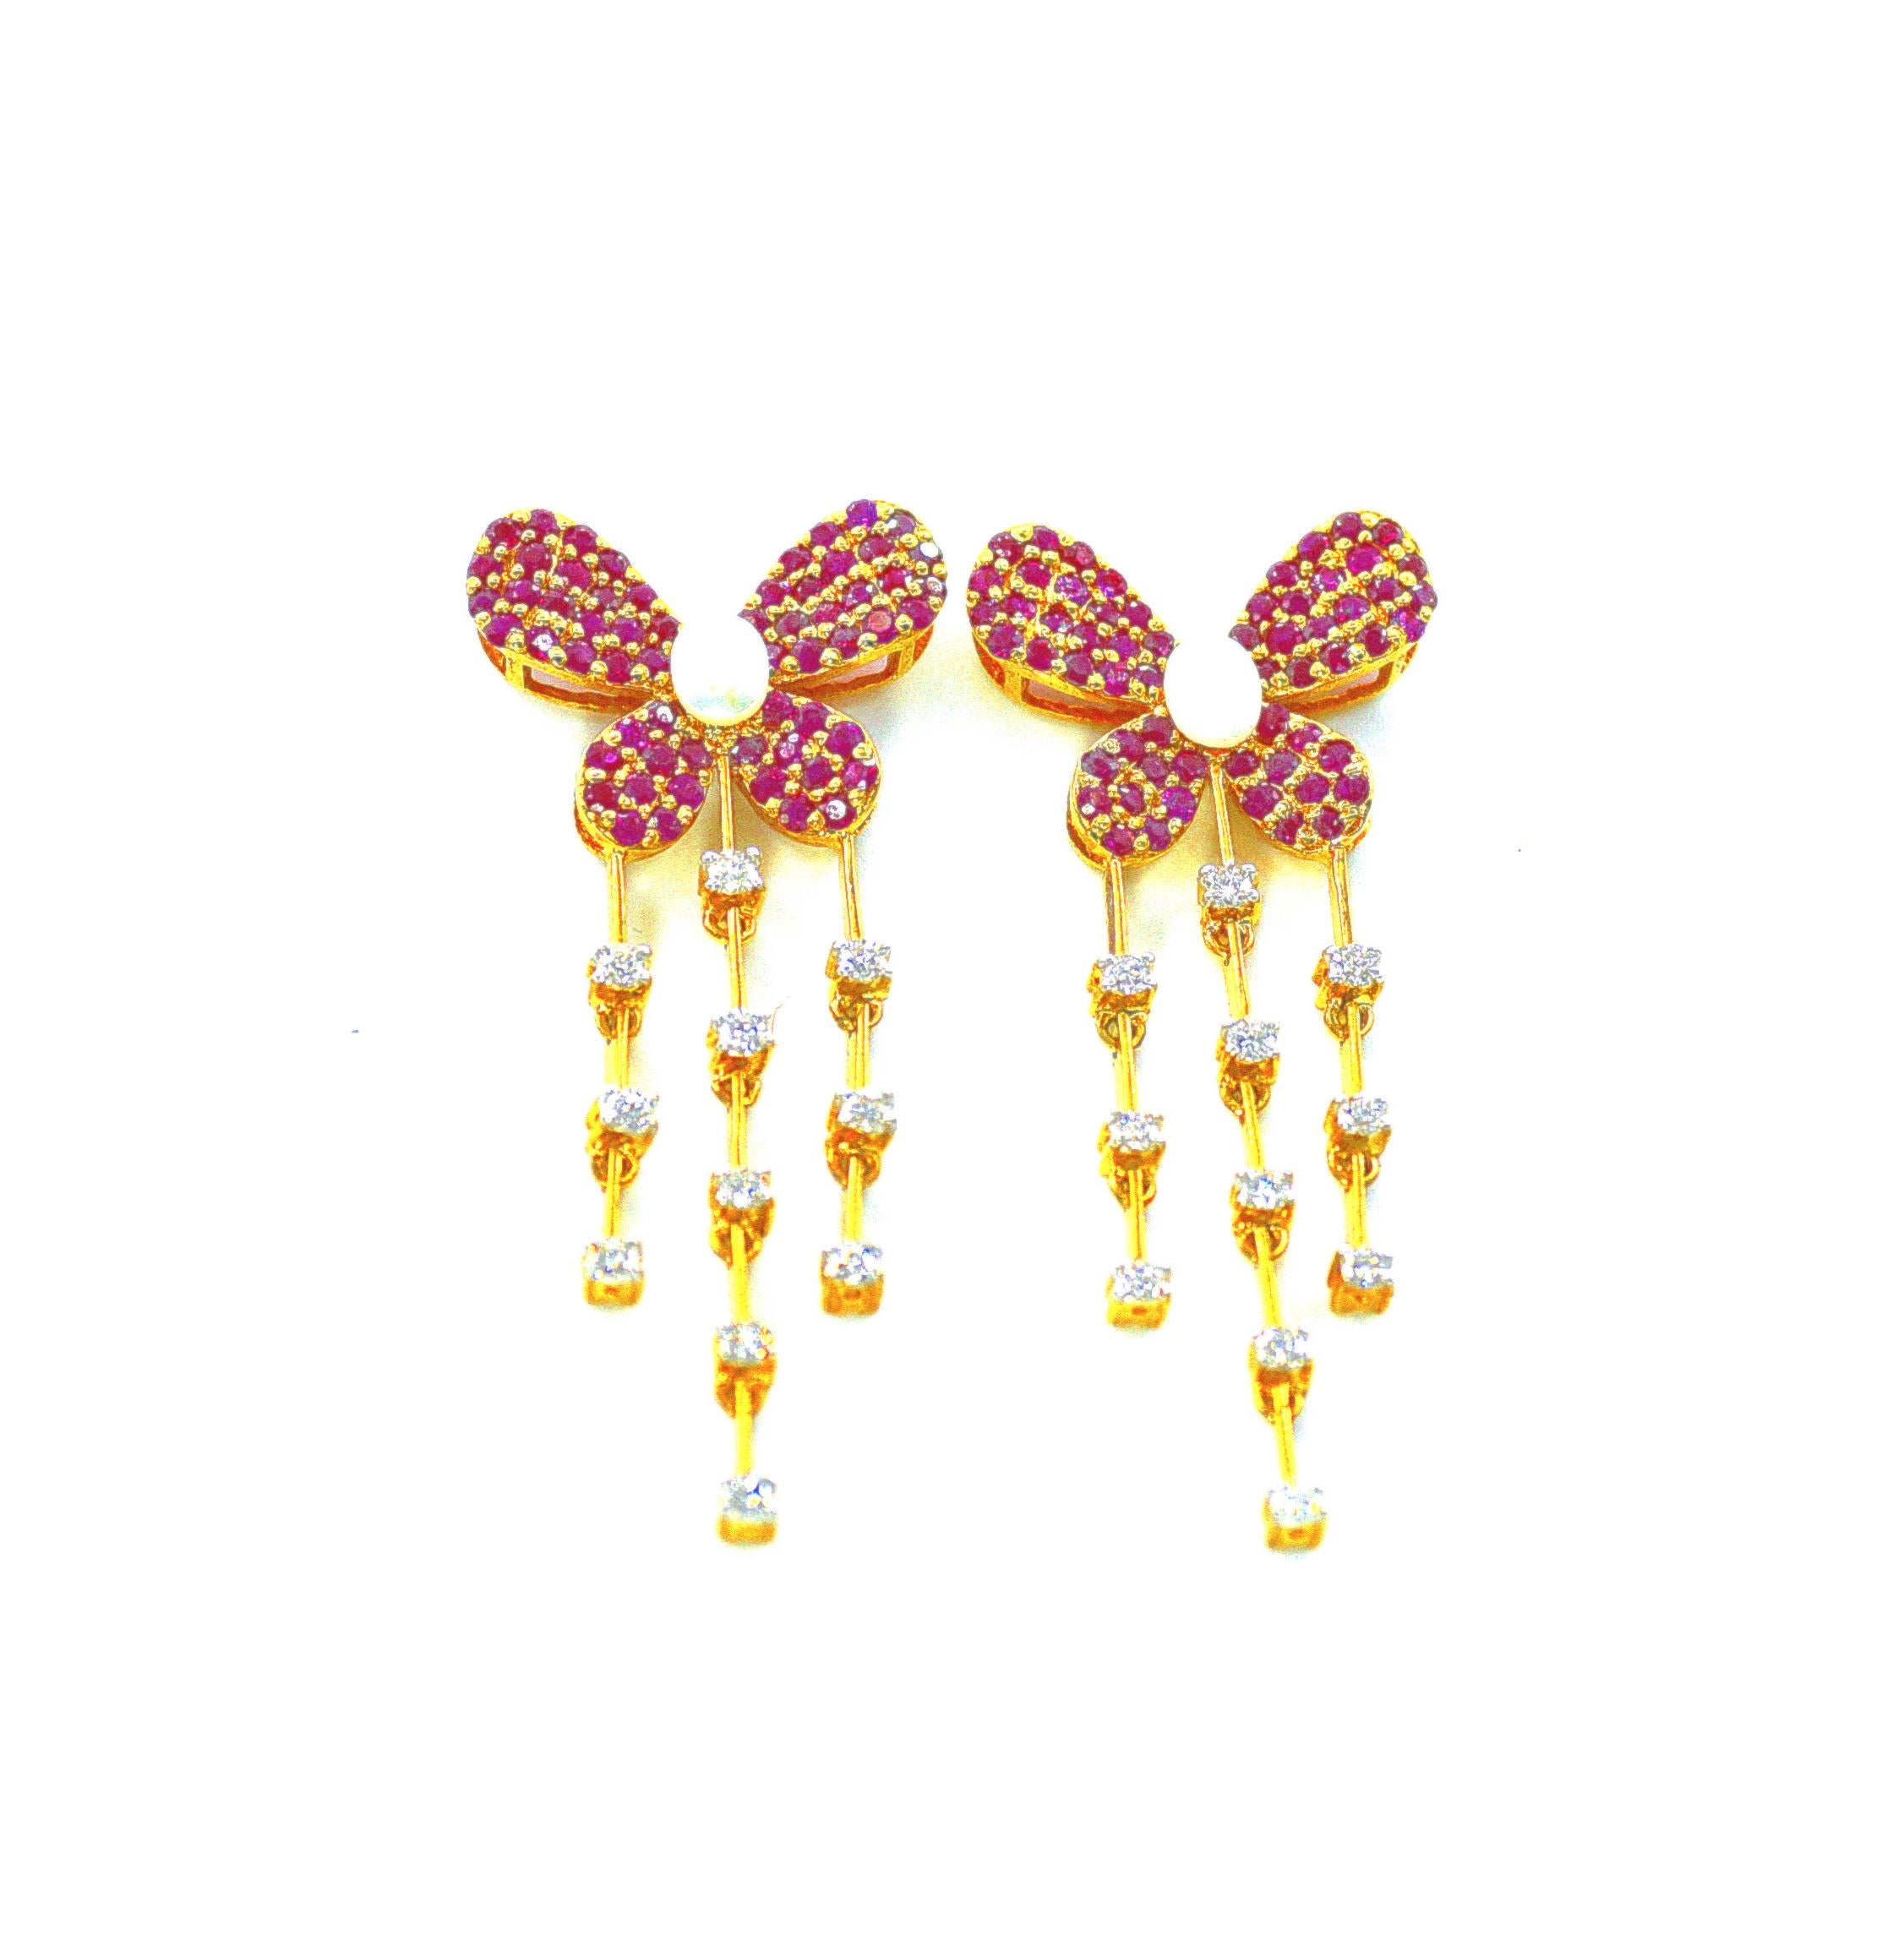 These Classic yet timeless Diamond Ruby Butterfly earrings have 0.68 ct sparkling diamonds and 0.95 pink Burmese rubies beautifully handcrafted in 14k yellow gold.
Most of our jewels are made to order, so please allow us for a 2-4 week